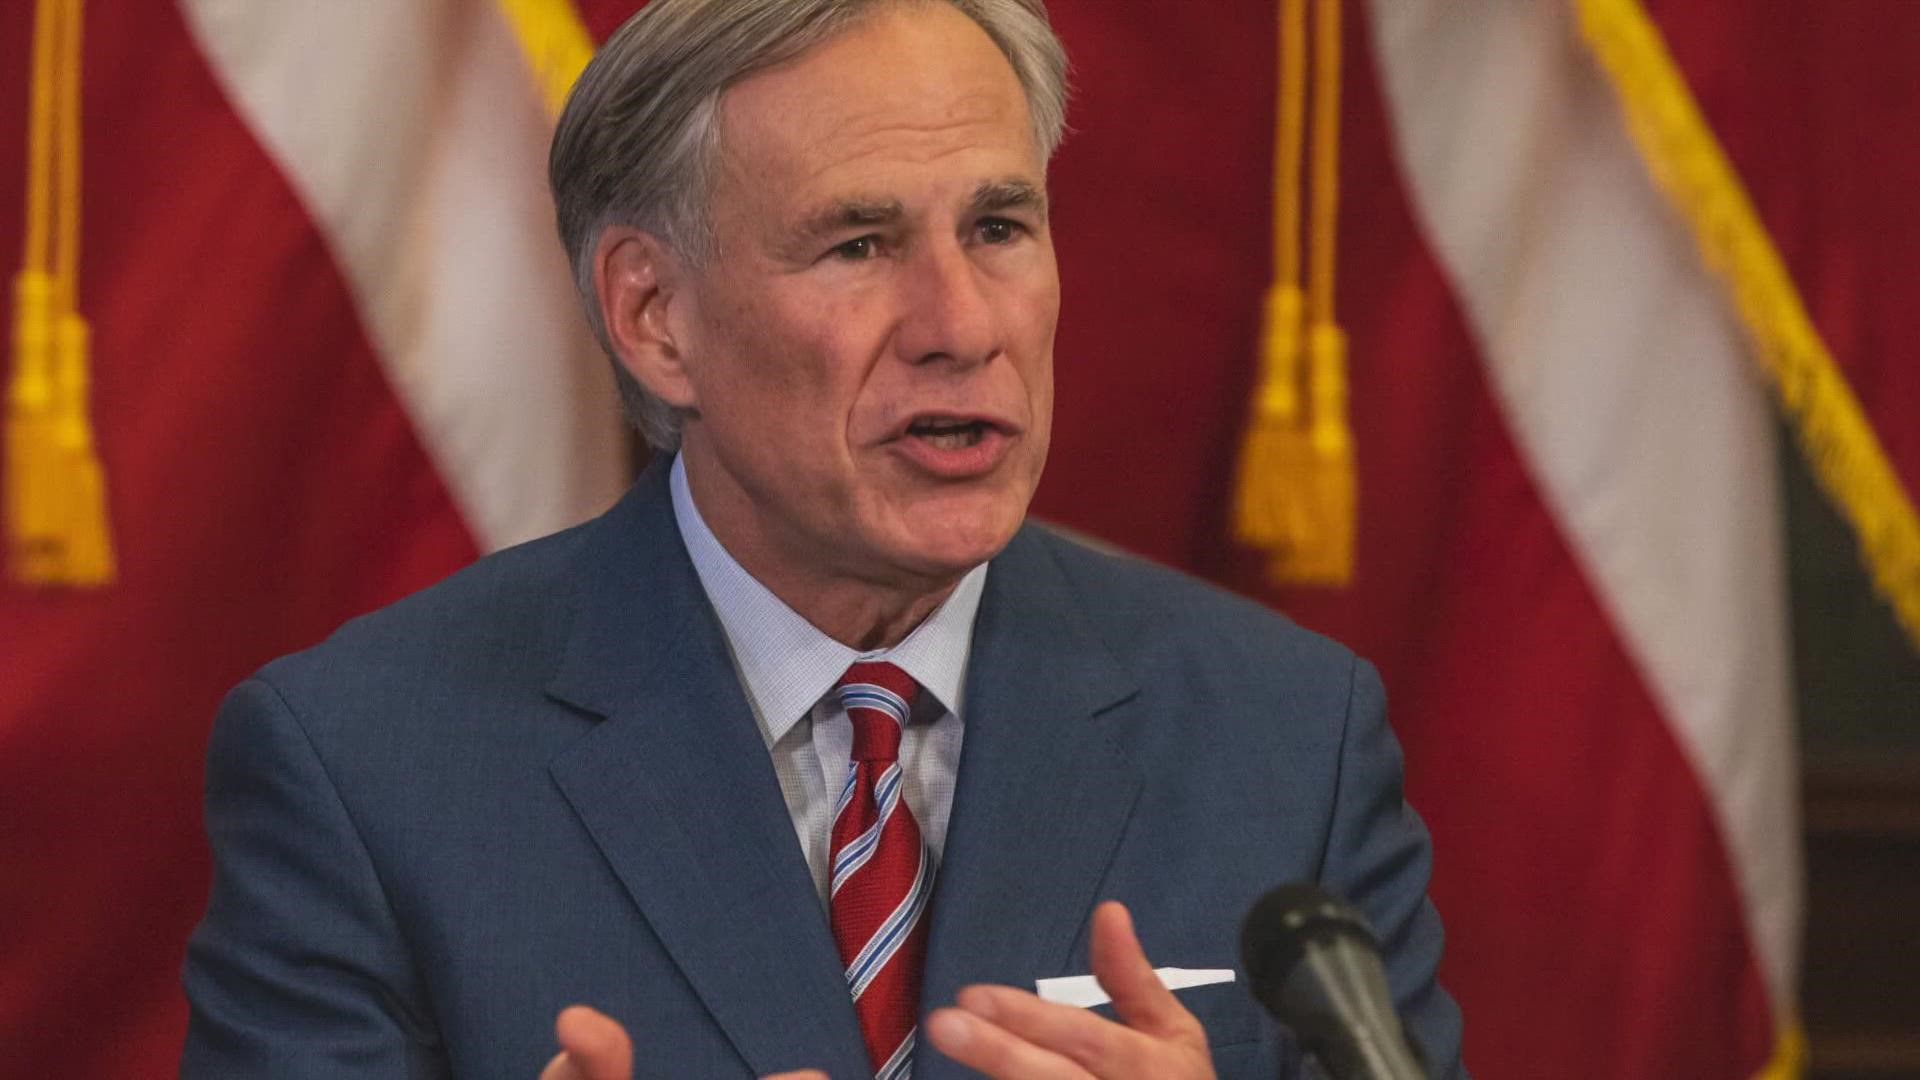 Gov. Abbott remained quiet on his first full day in quarantine in the governor's mansion. Abbott's office did not provide an update on his condition.